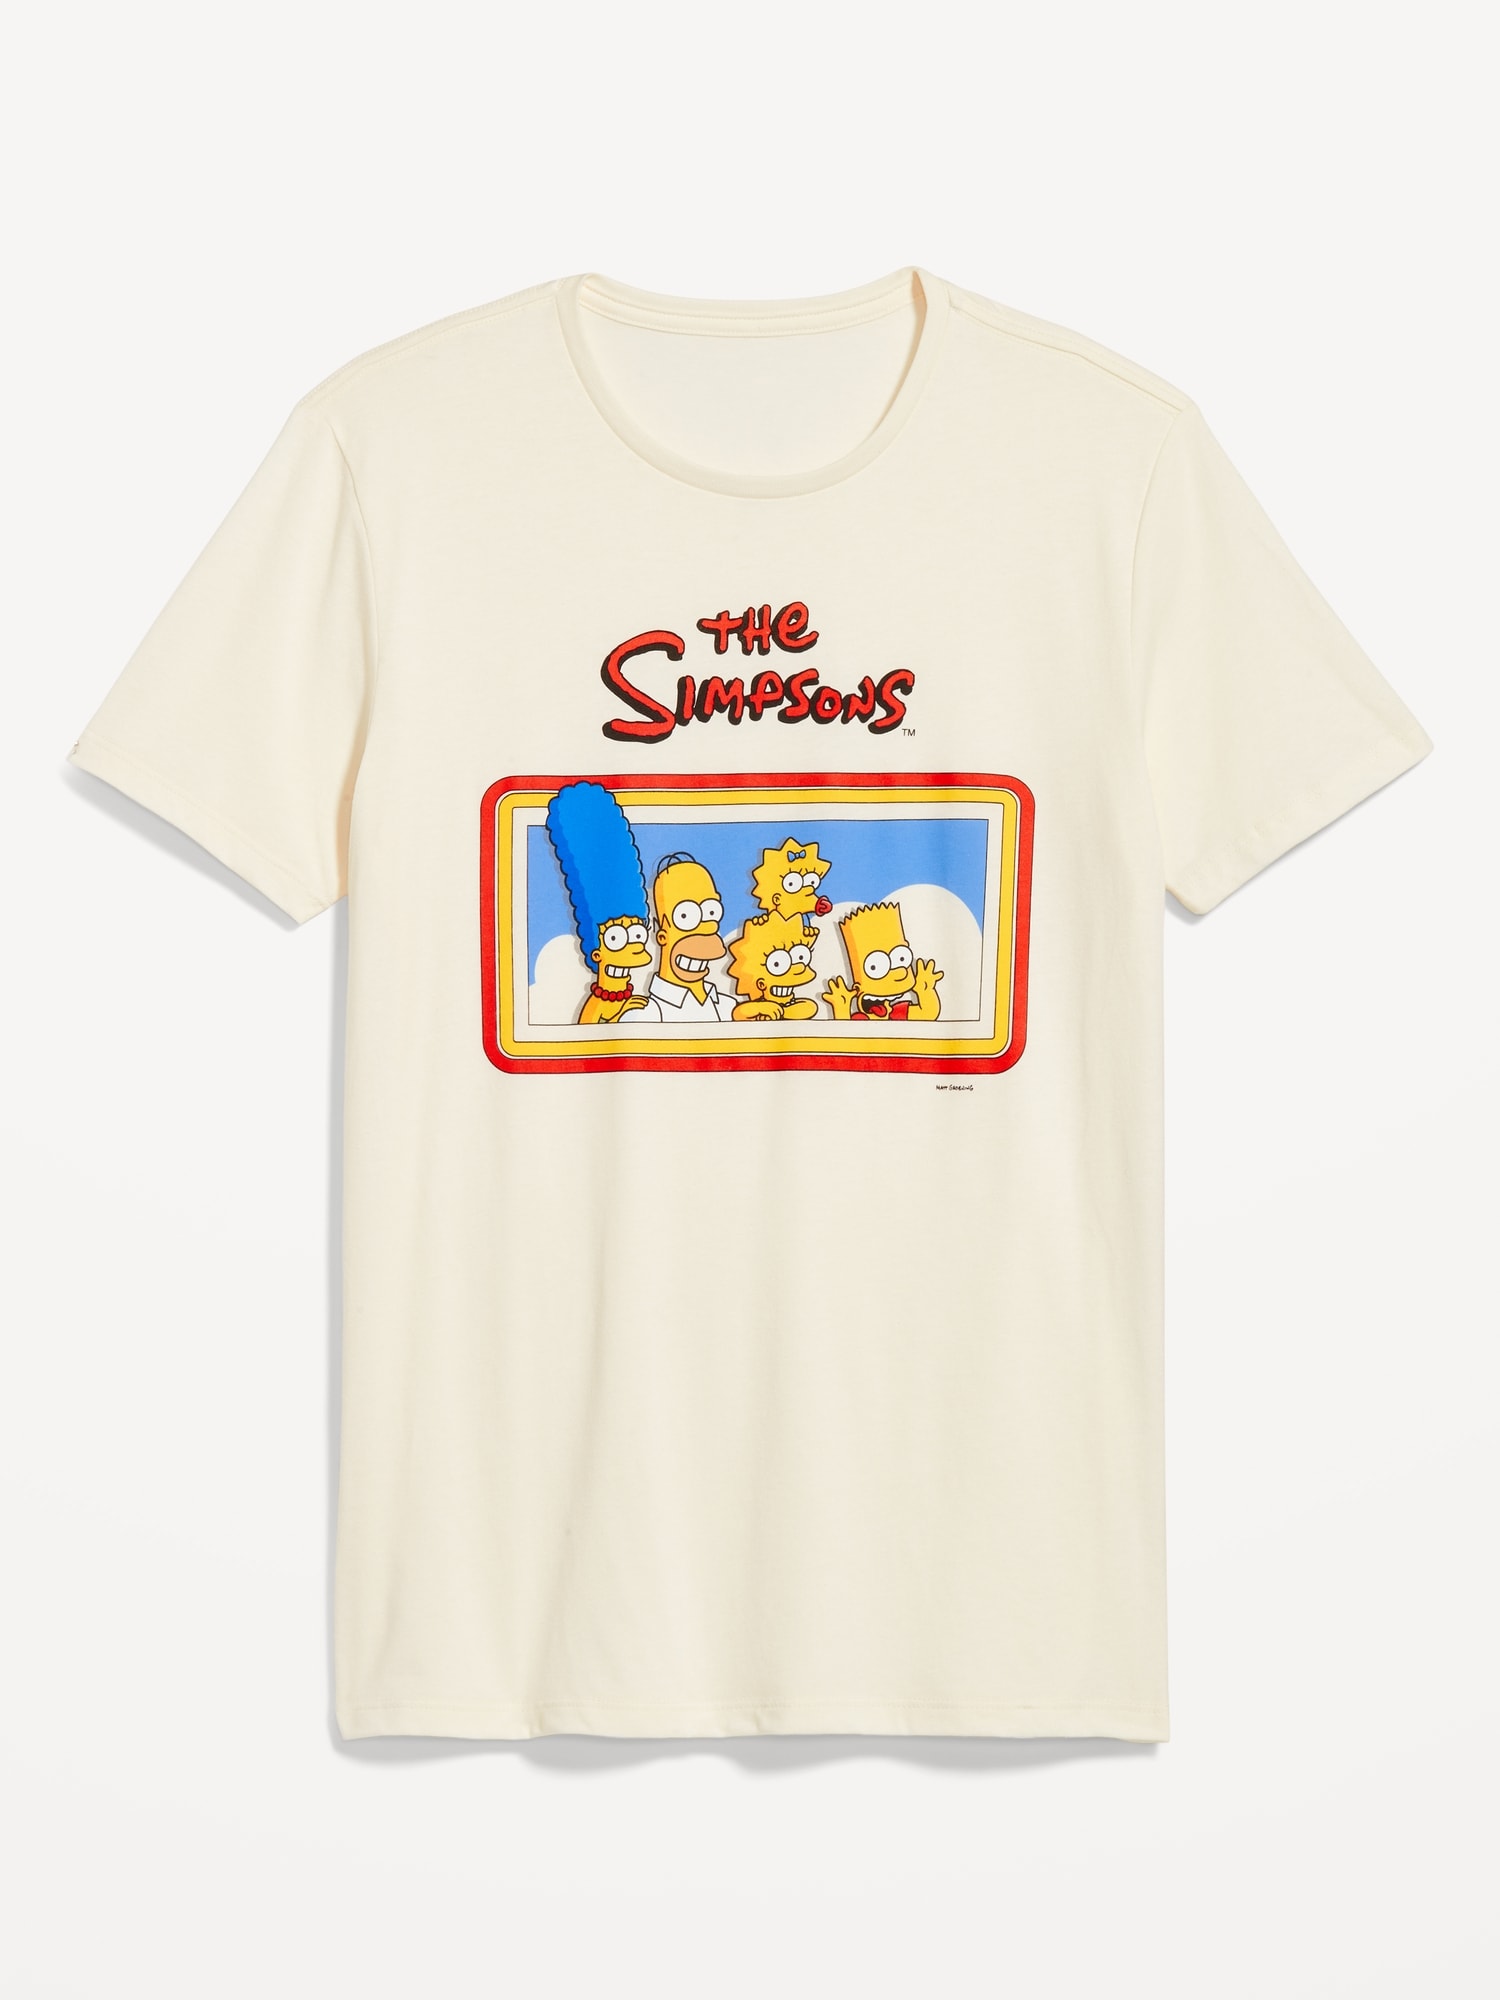 The Simpsons™ T-Shirt